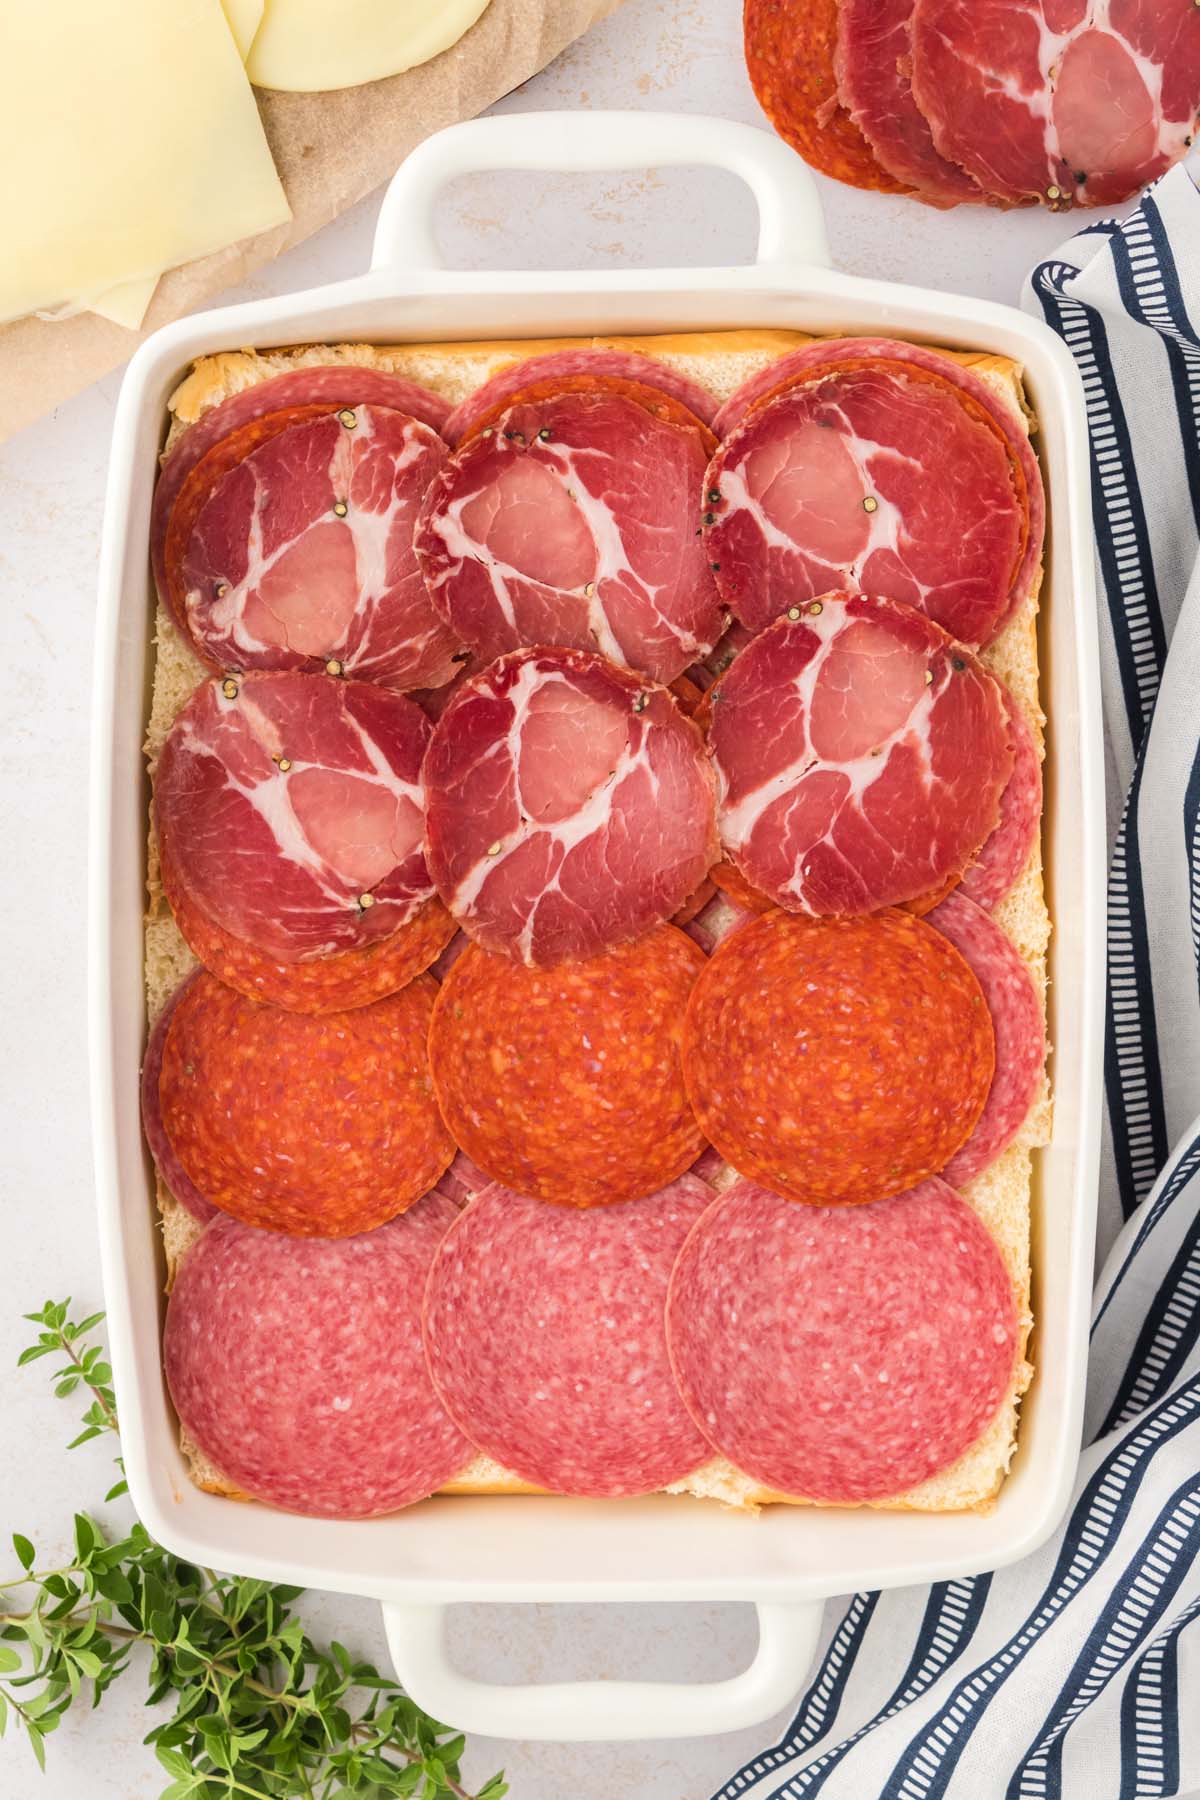 Meat slices placed over rolls in a dish.